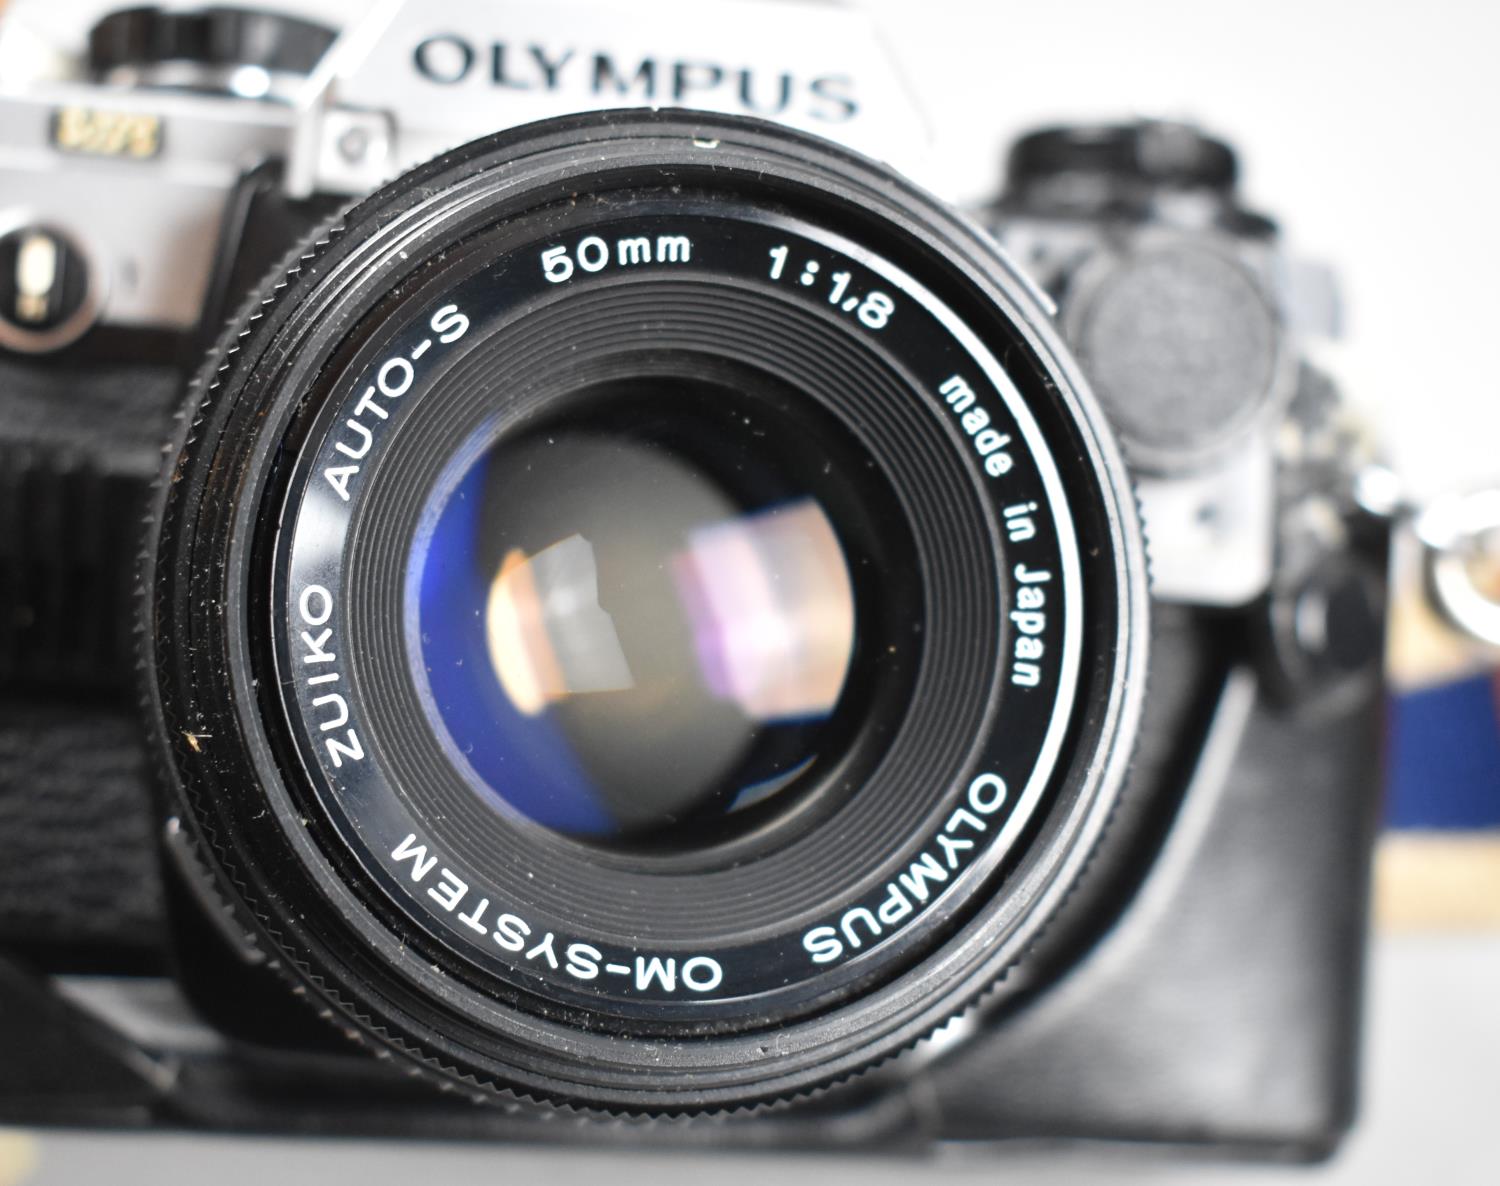 An Olympus OM10 35mm Camera Complete with Sigma Zoom Lens, Carrying Bag - Image 3 of 4